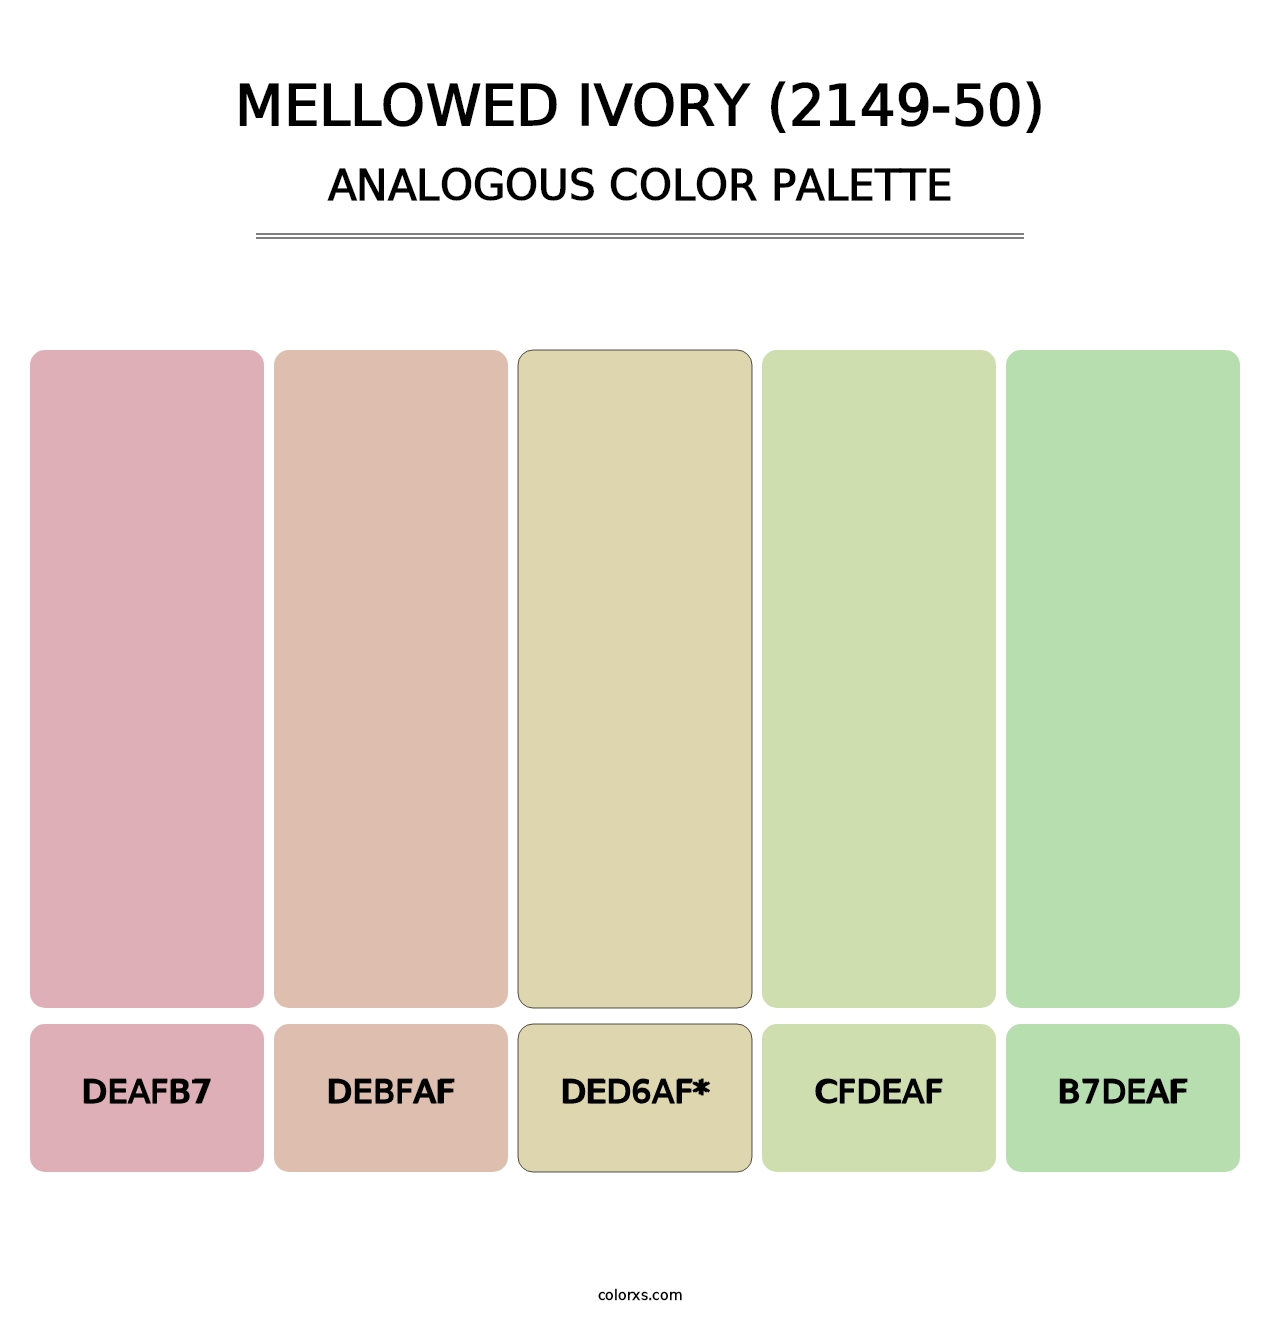 Mellowed Ivory (2149-50) - Analogous Color Palette